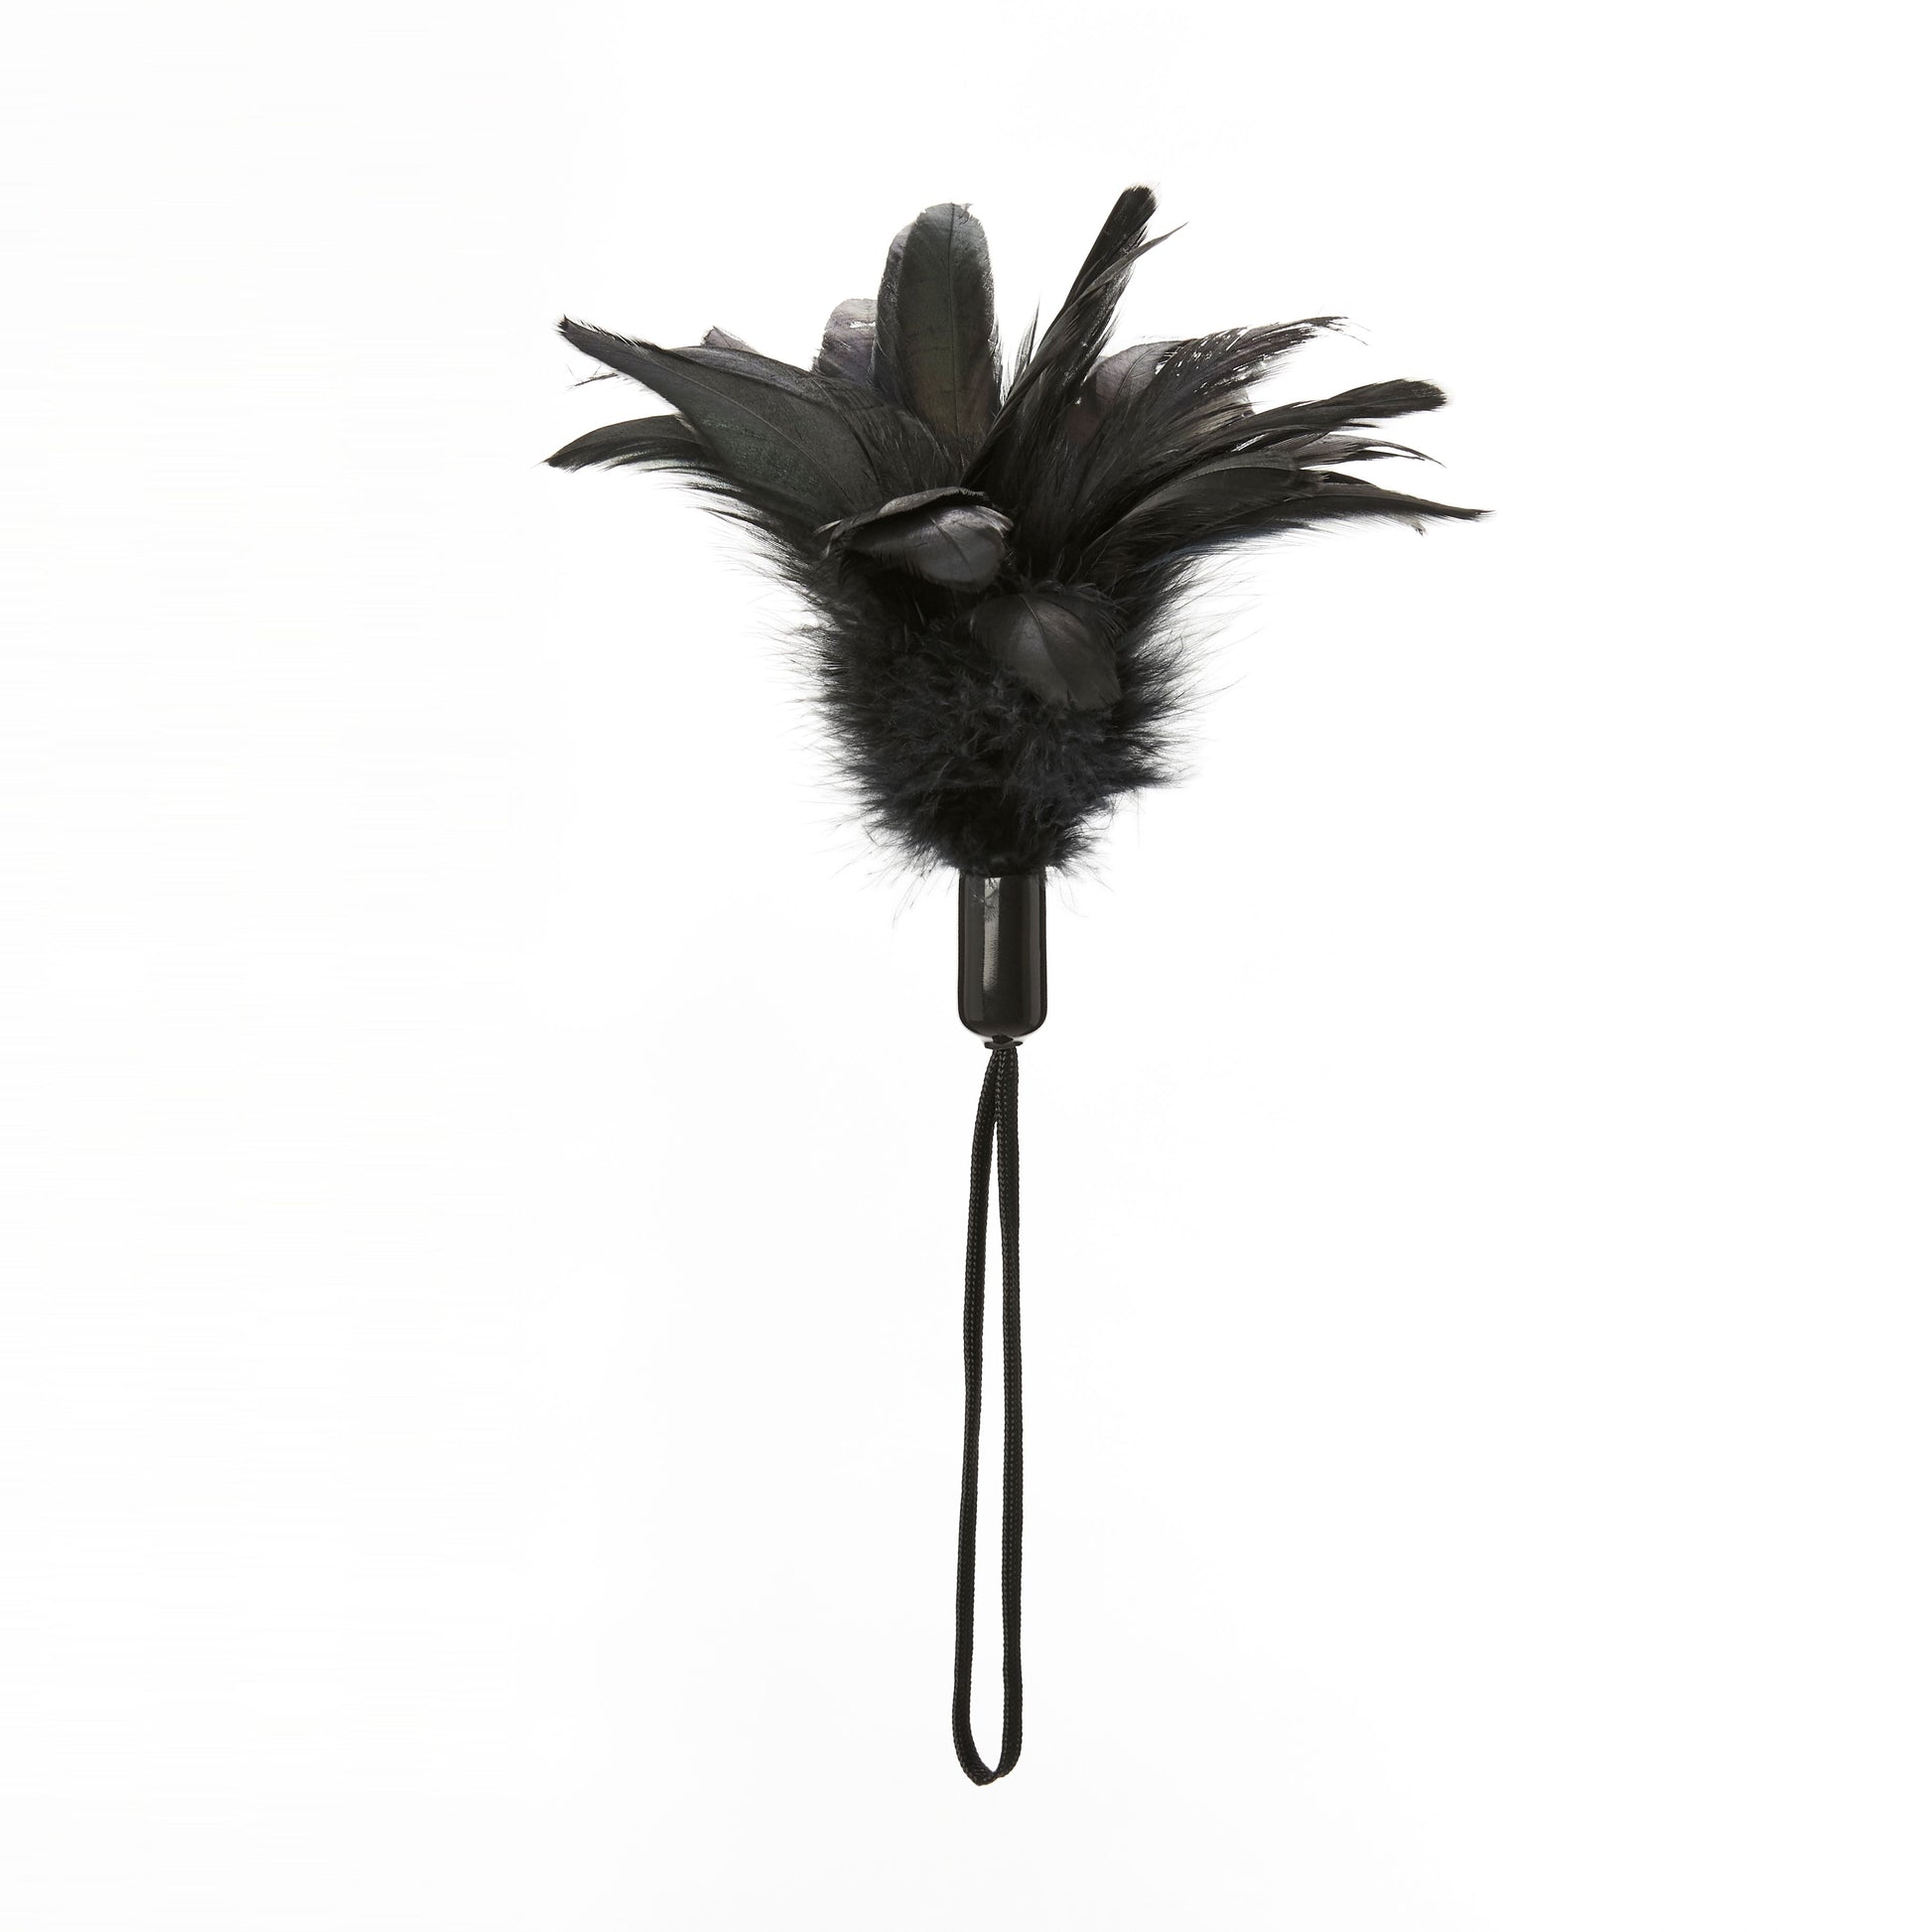 Photo of one of the Pleasure Feathers (black).